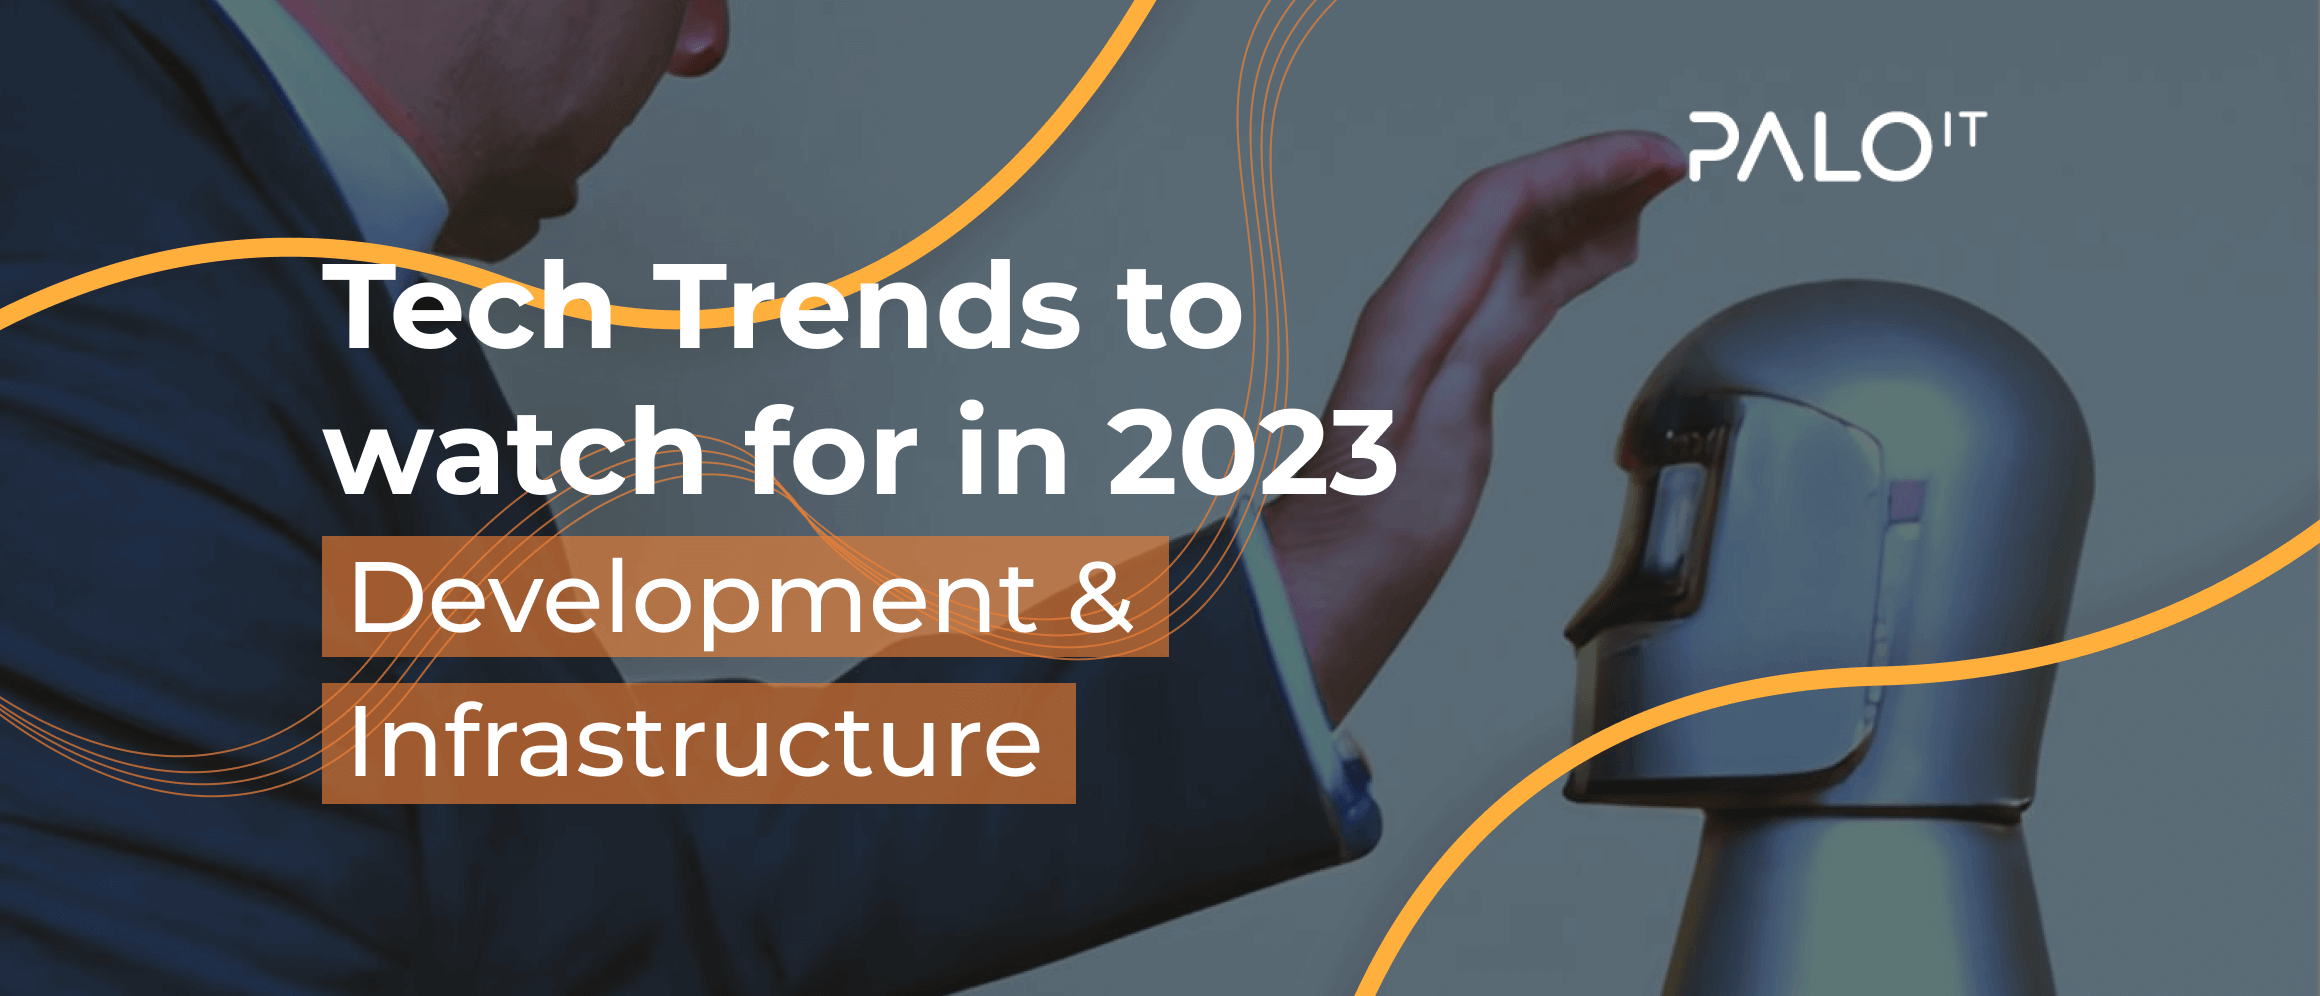 Tech Trends to watch for in 2023: Development & Infrastructure